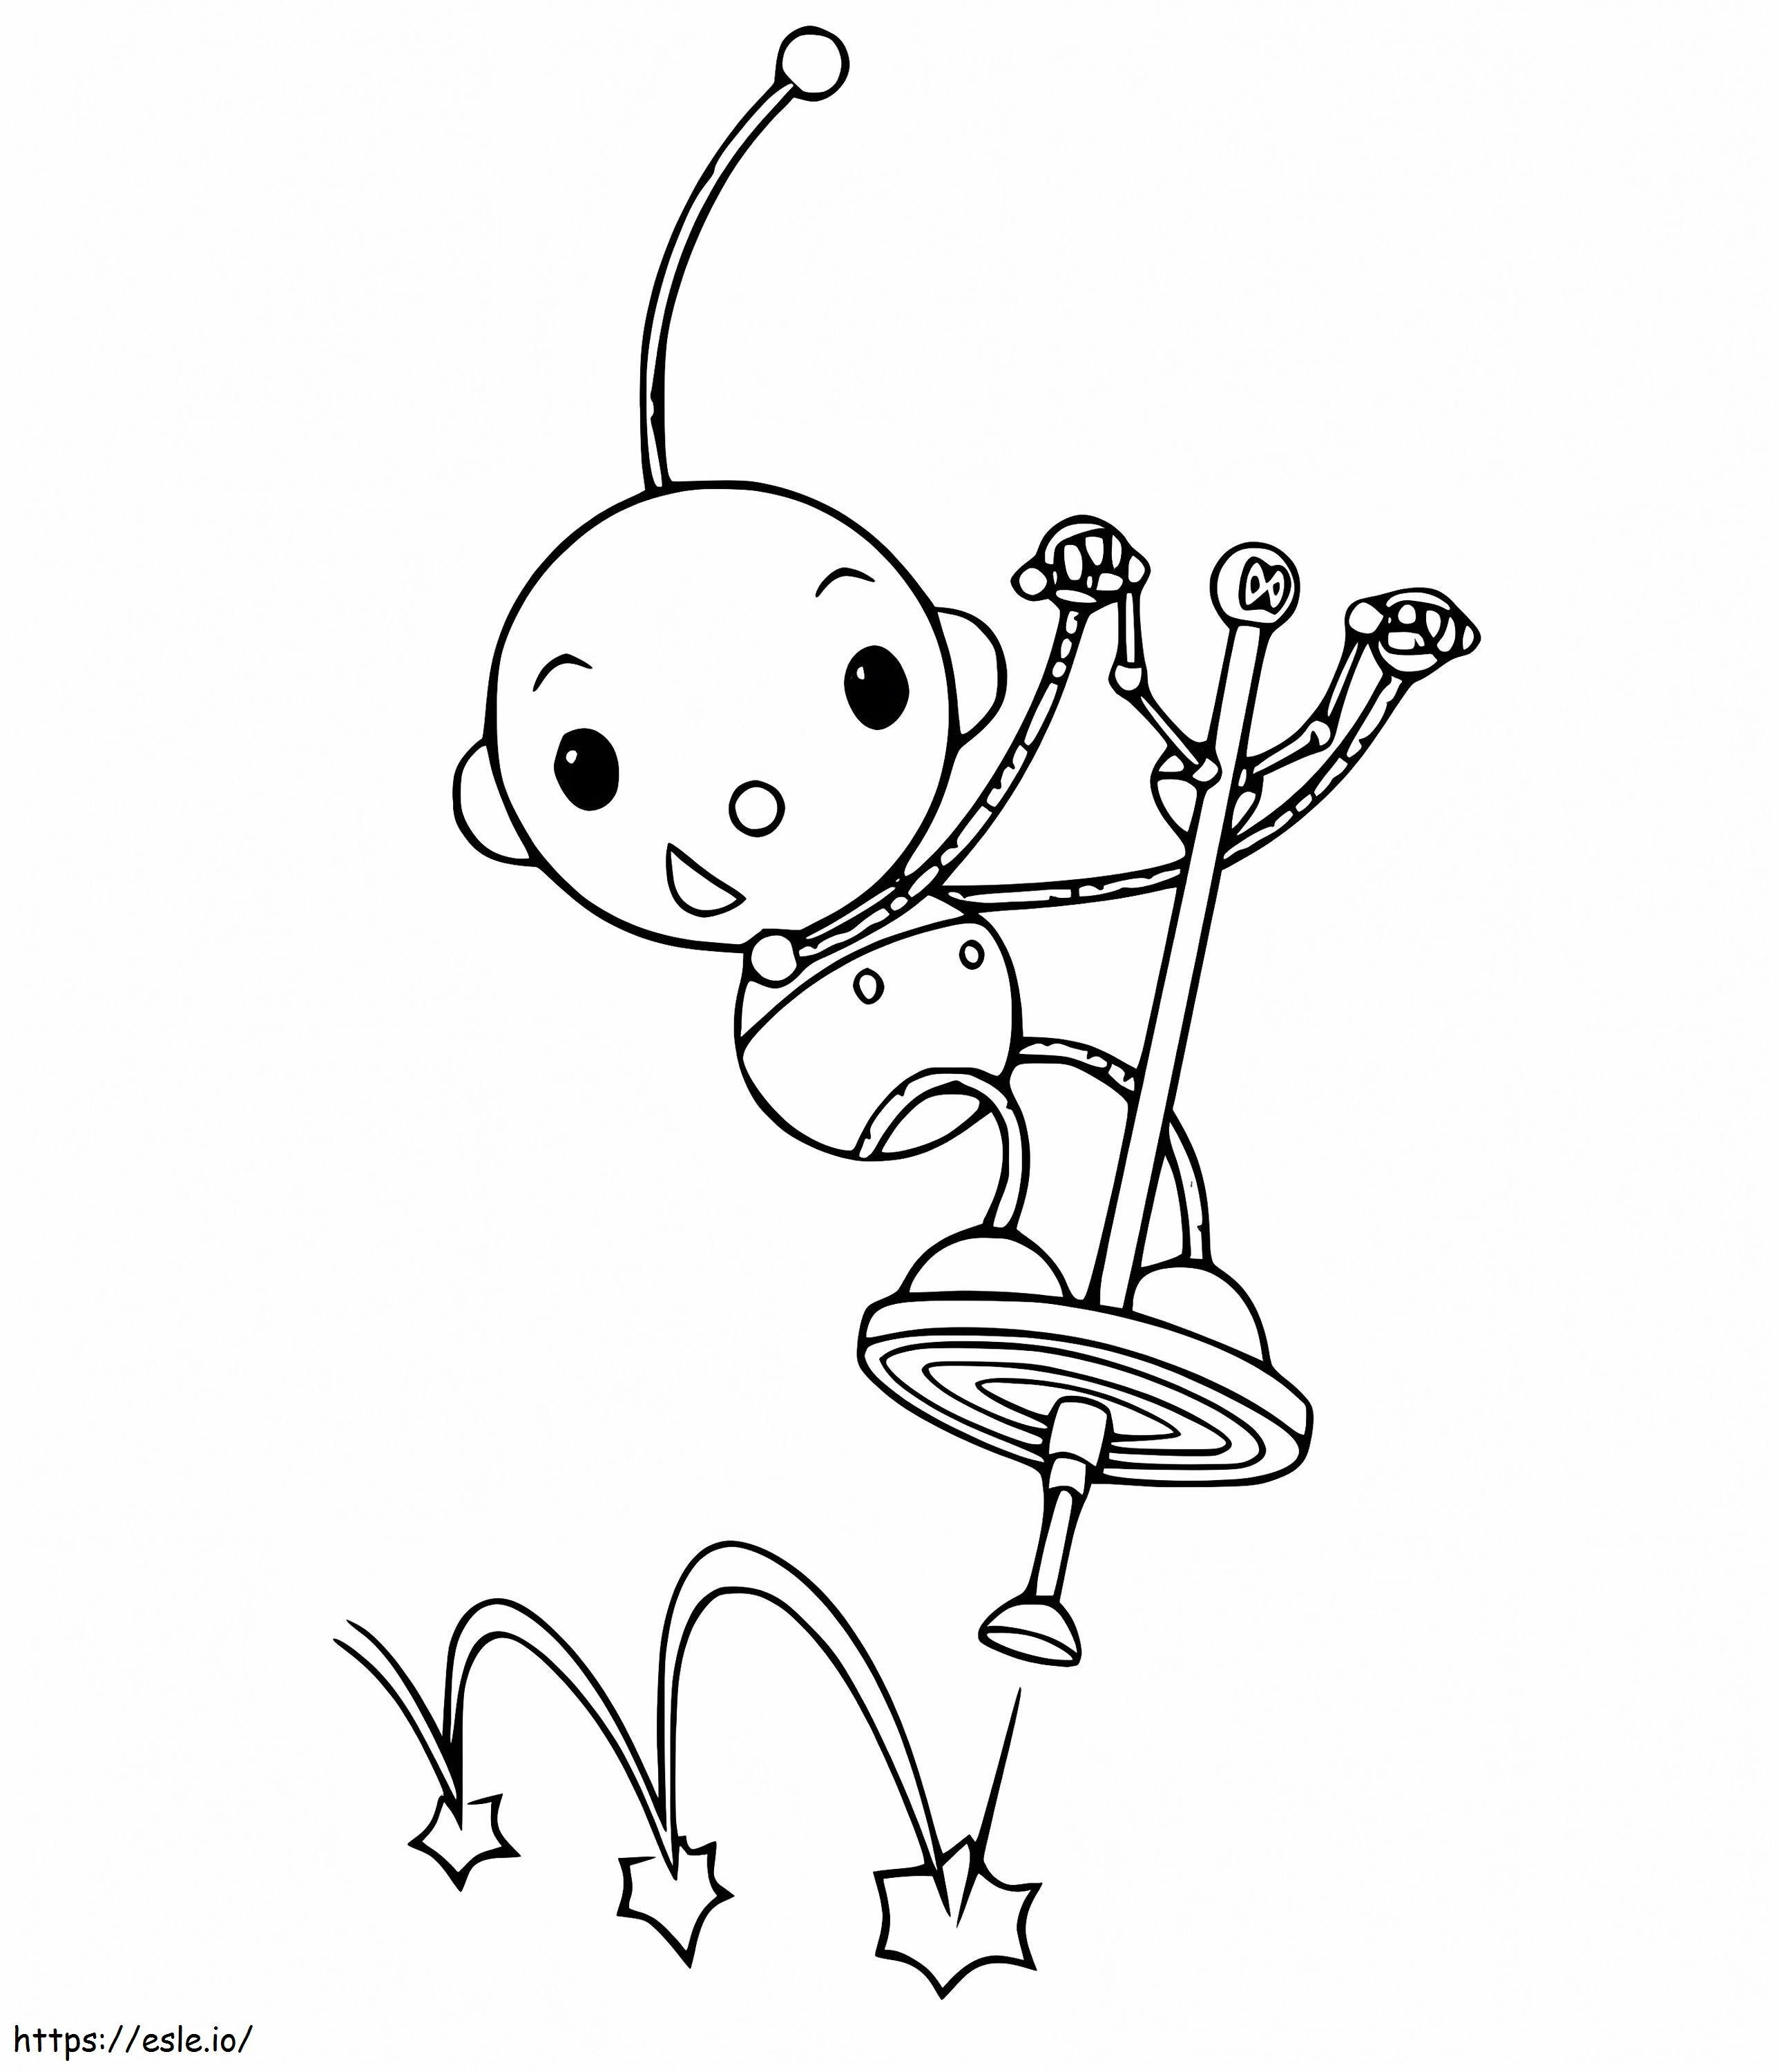 Olie Polie And Pogo Stick coloring page